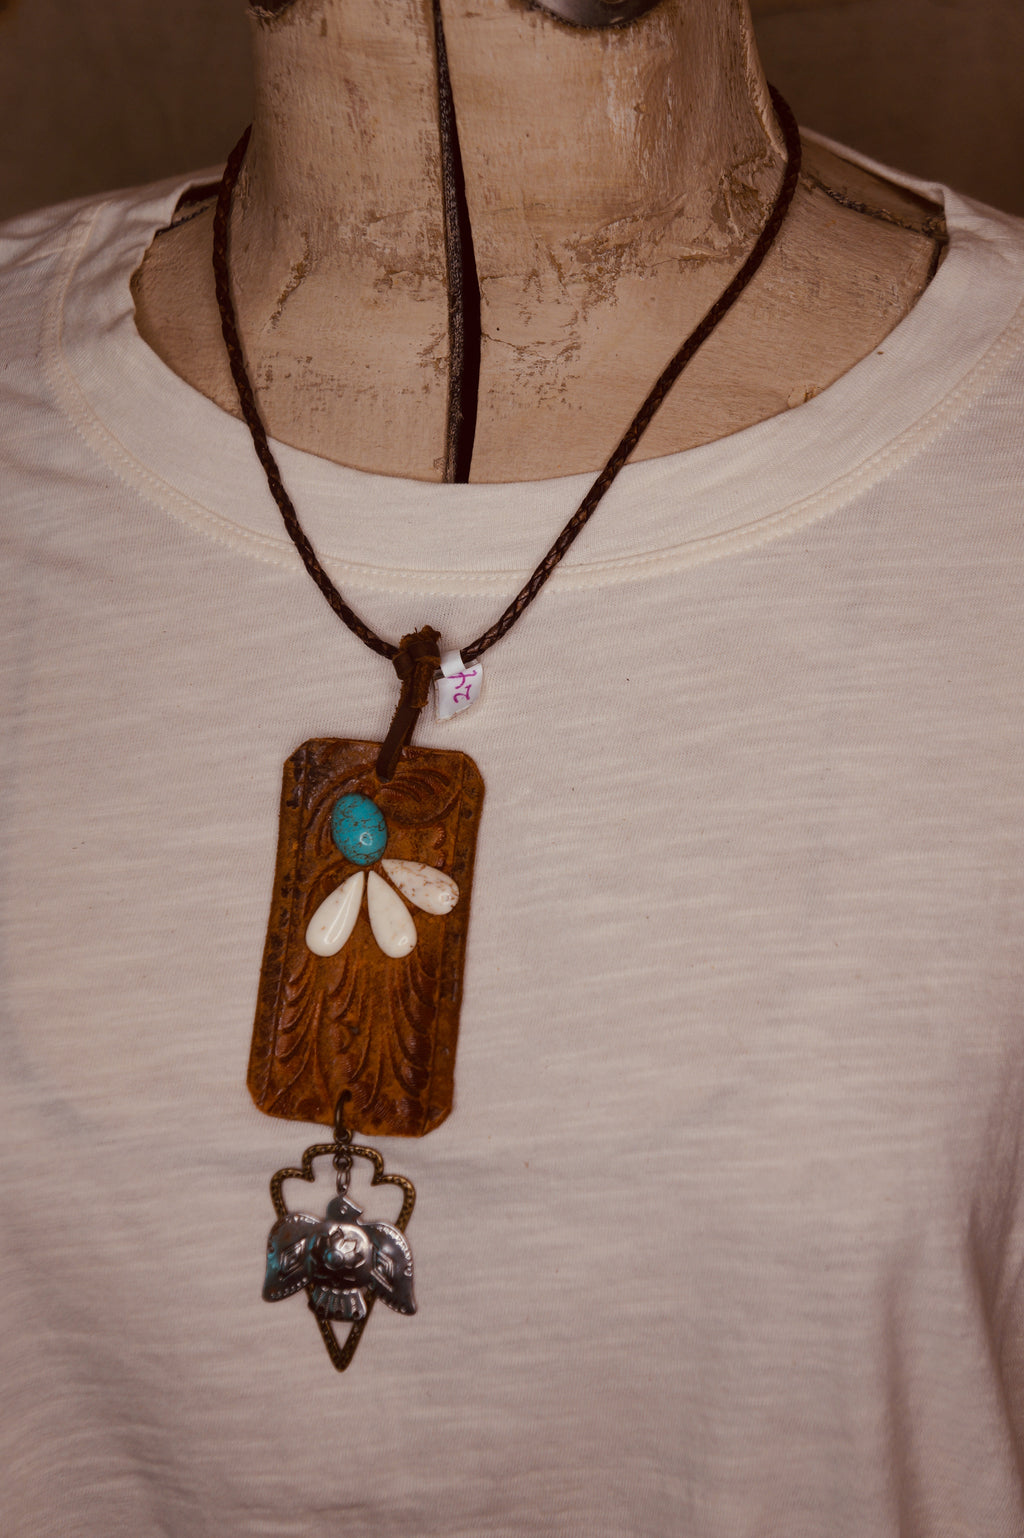 Leather Necklace with Pendant